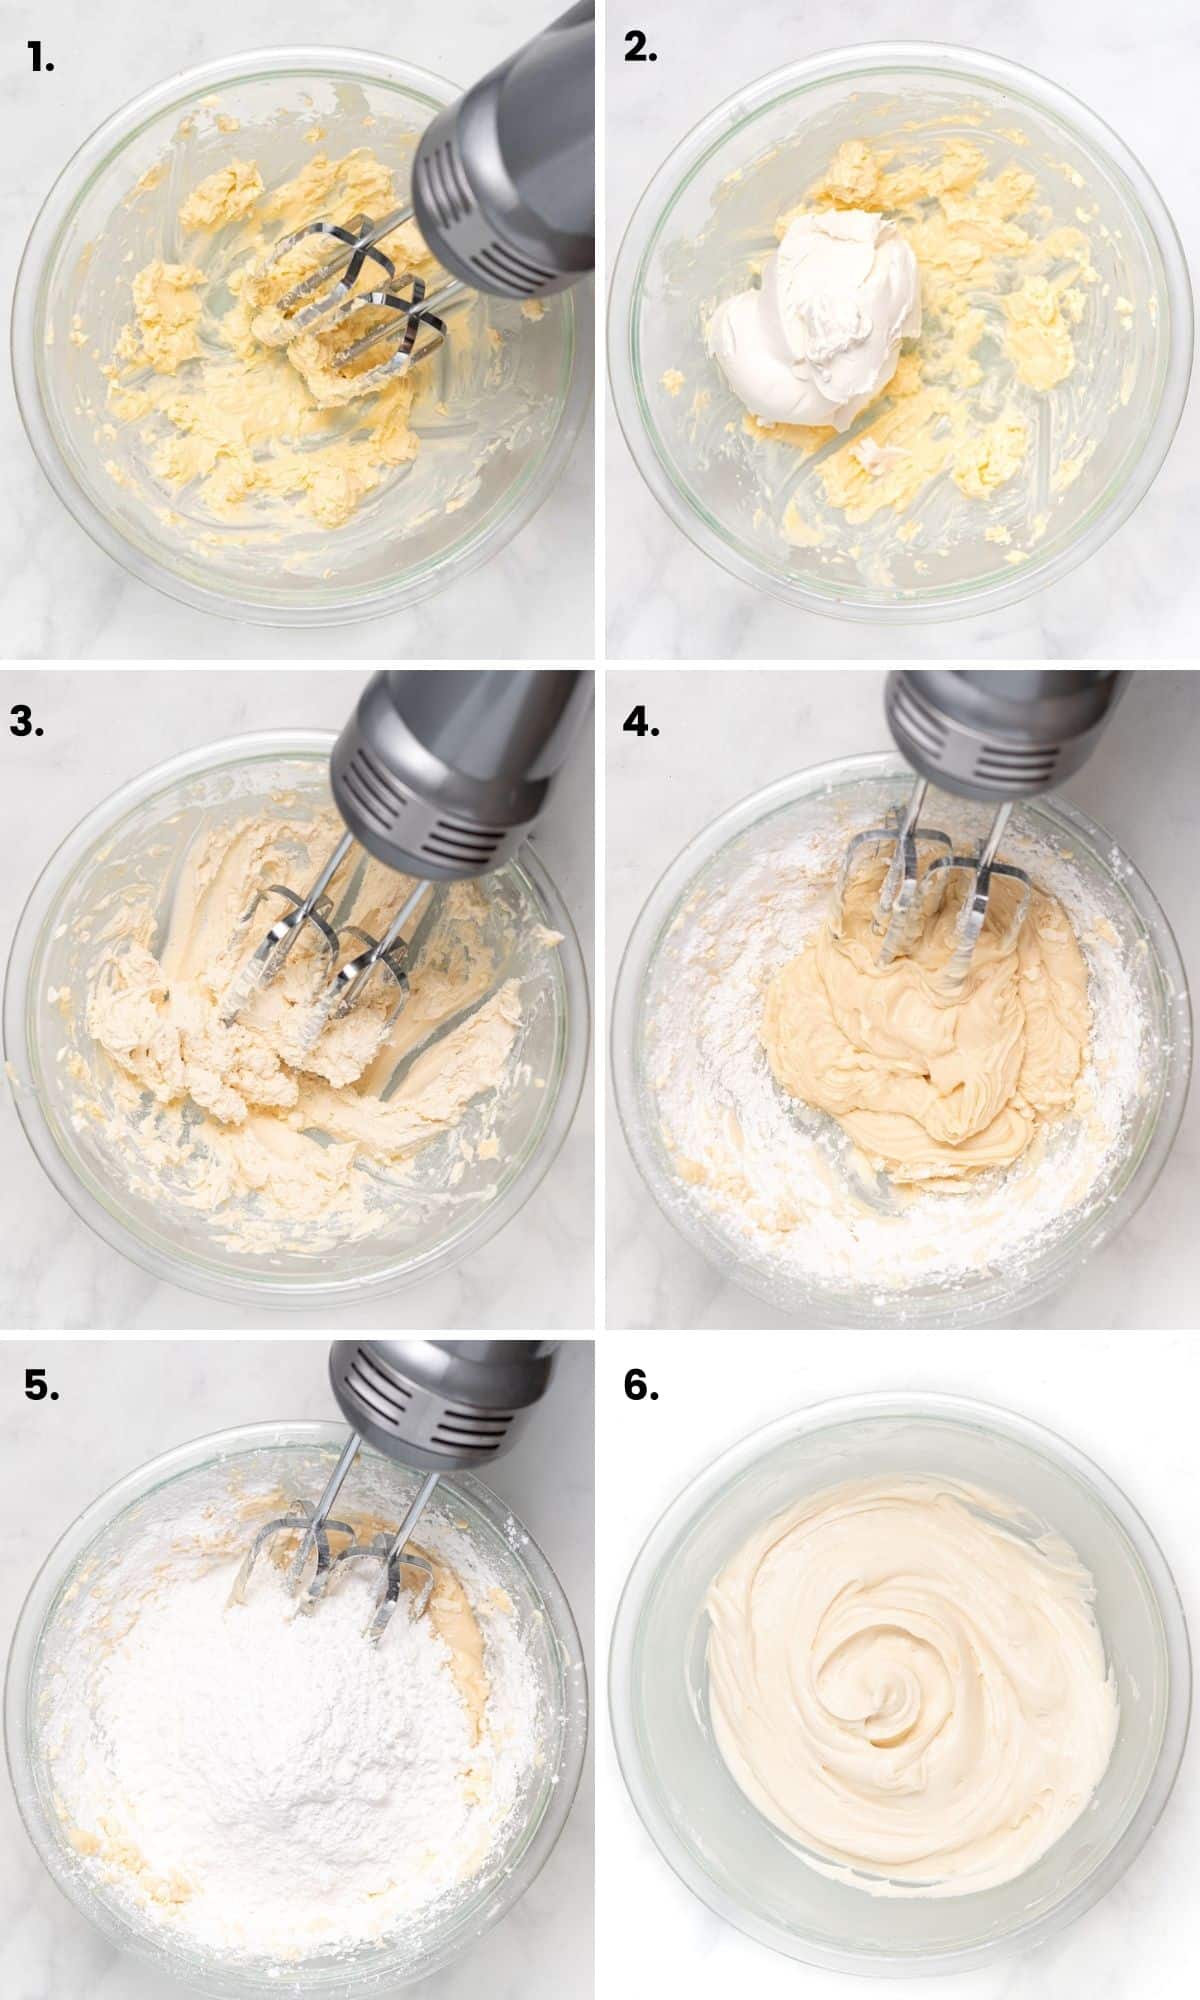 process photos showing how to make vegan cream cheese frosting as per written instructions 